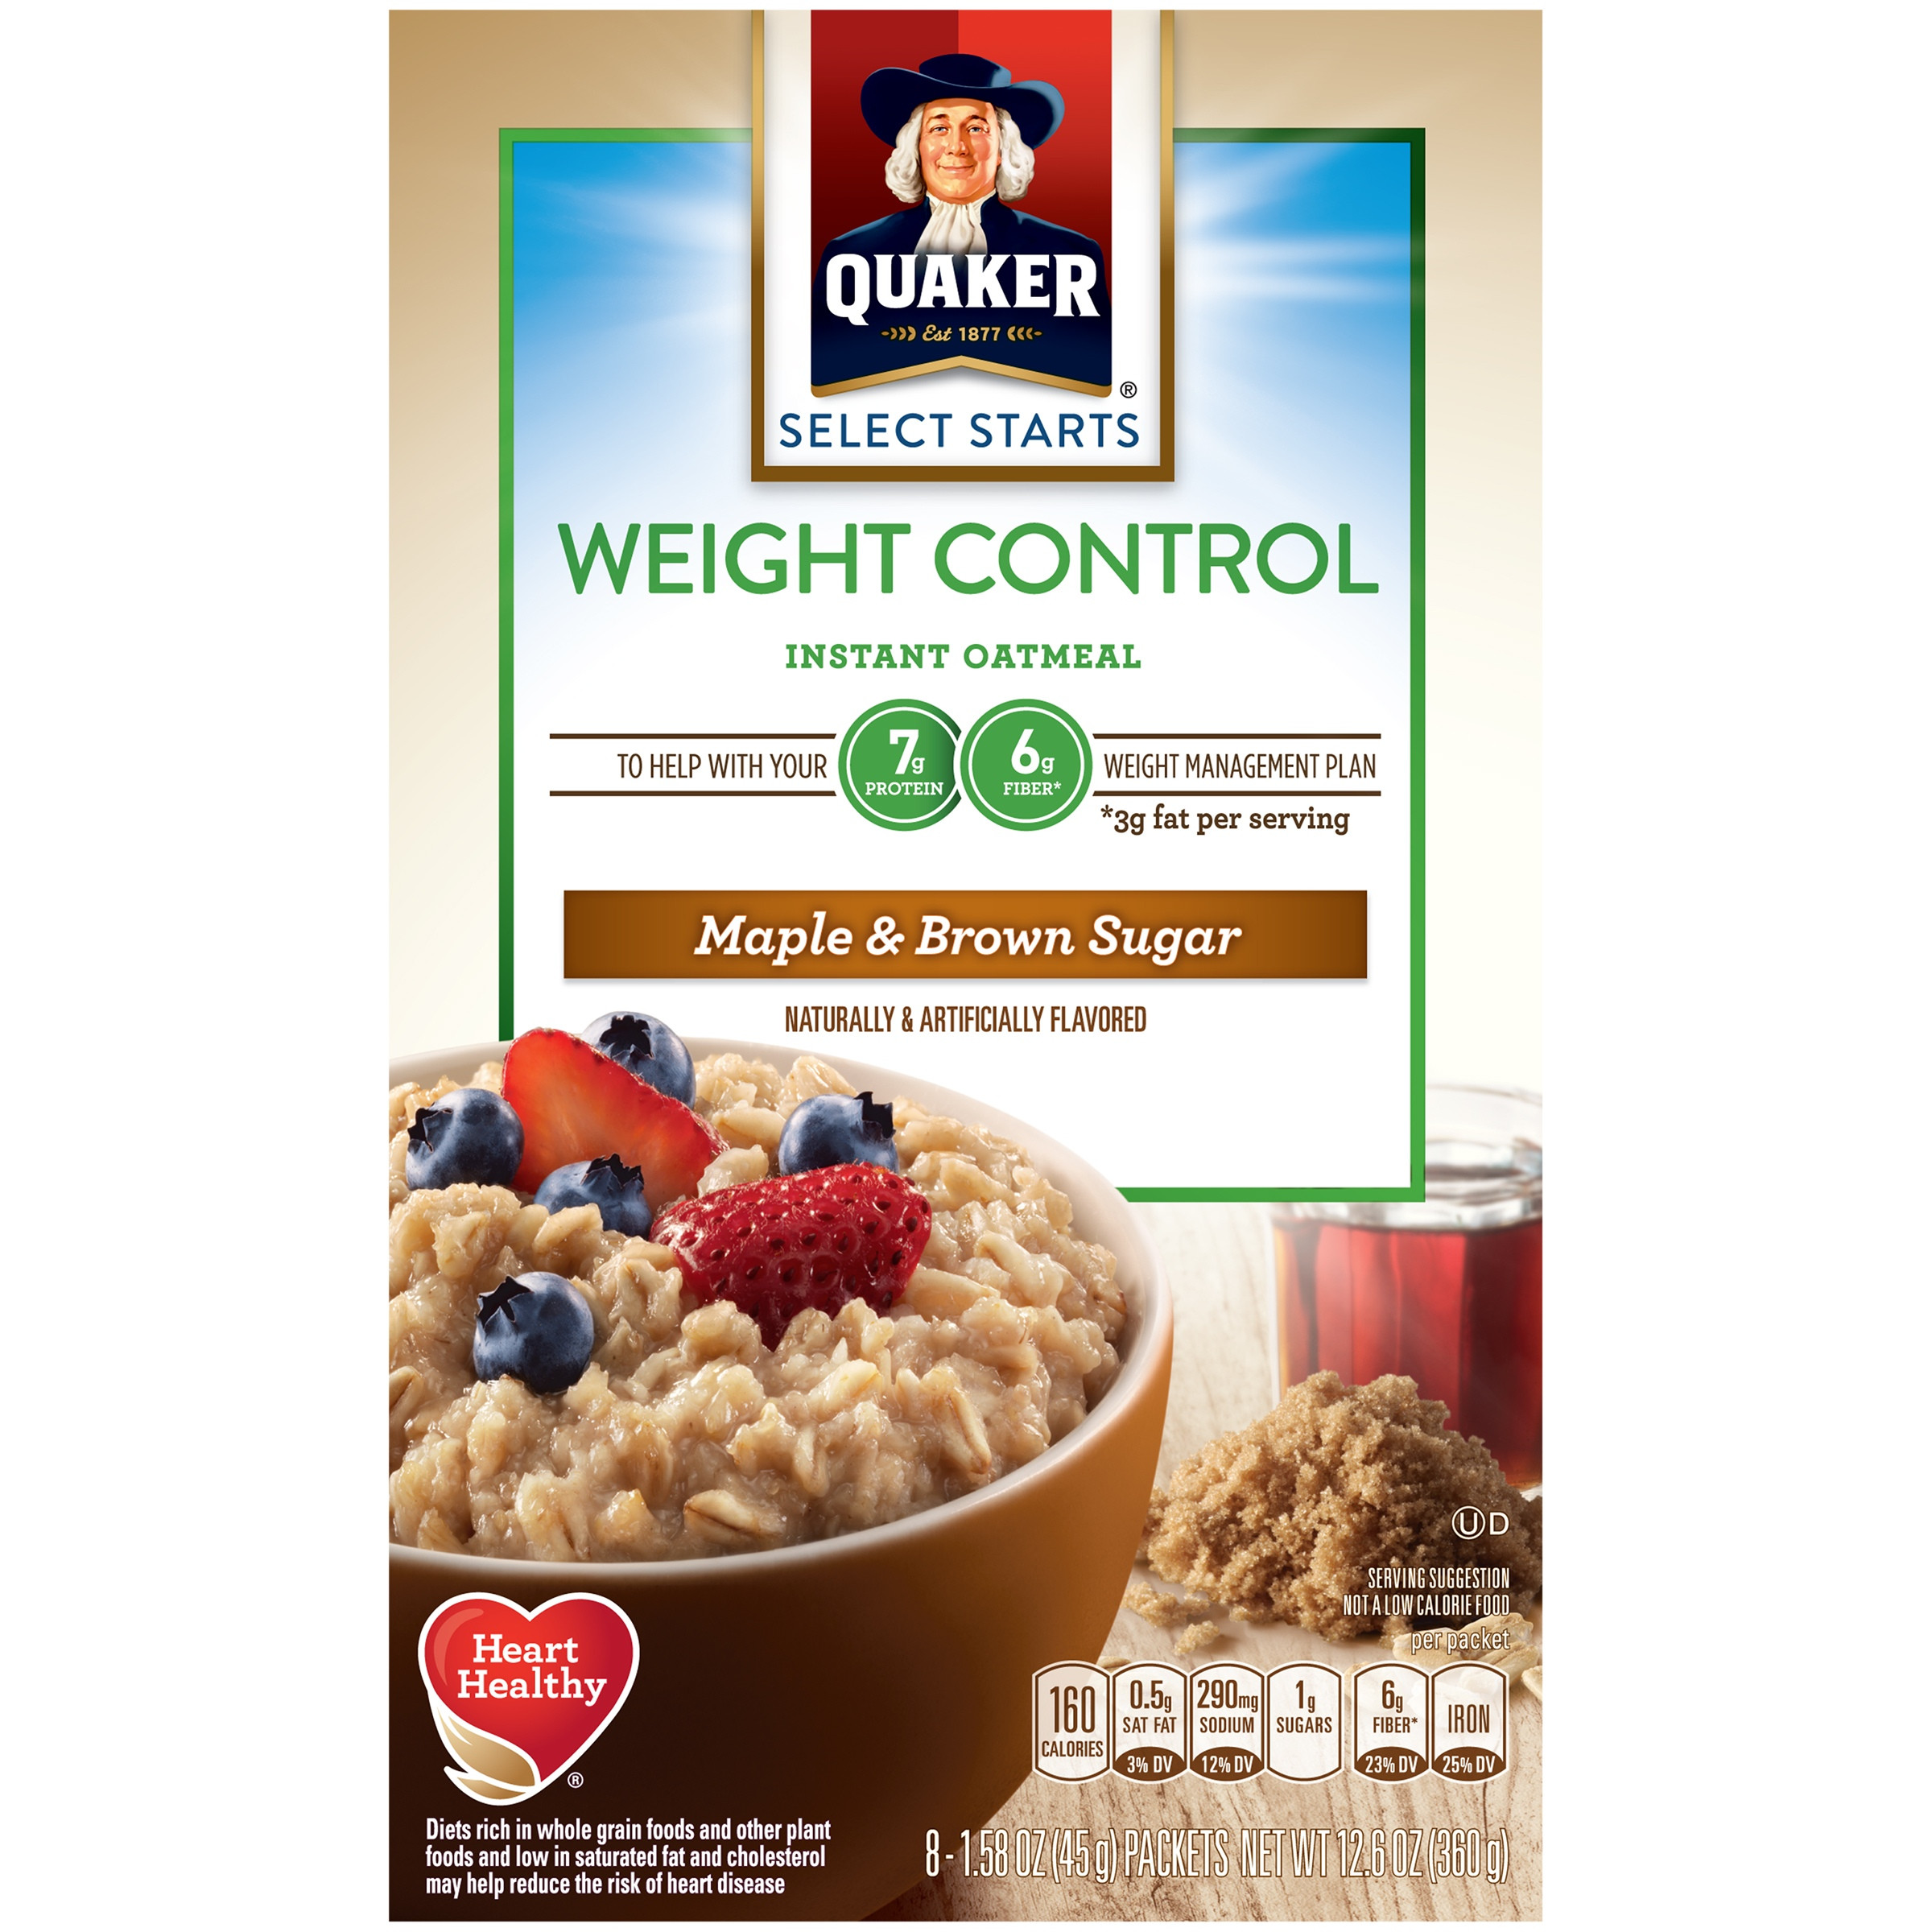 Quaker Oats Weight Control New Quaker Select Starts Weight Control Instant Oatmeal Maple